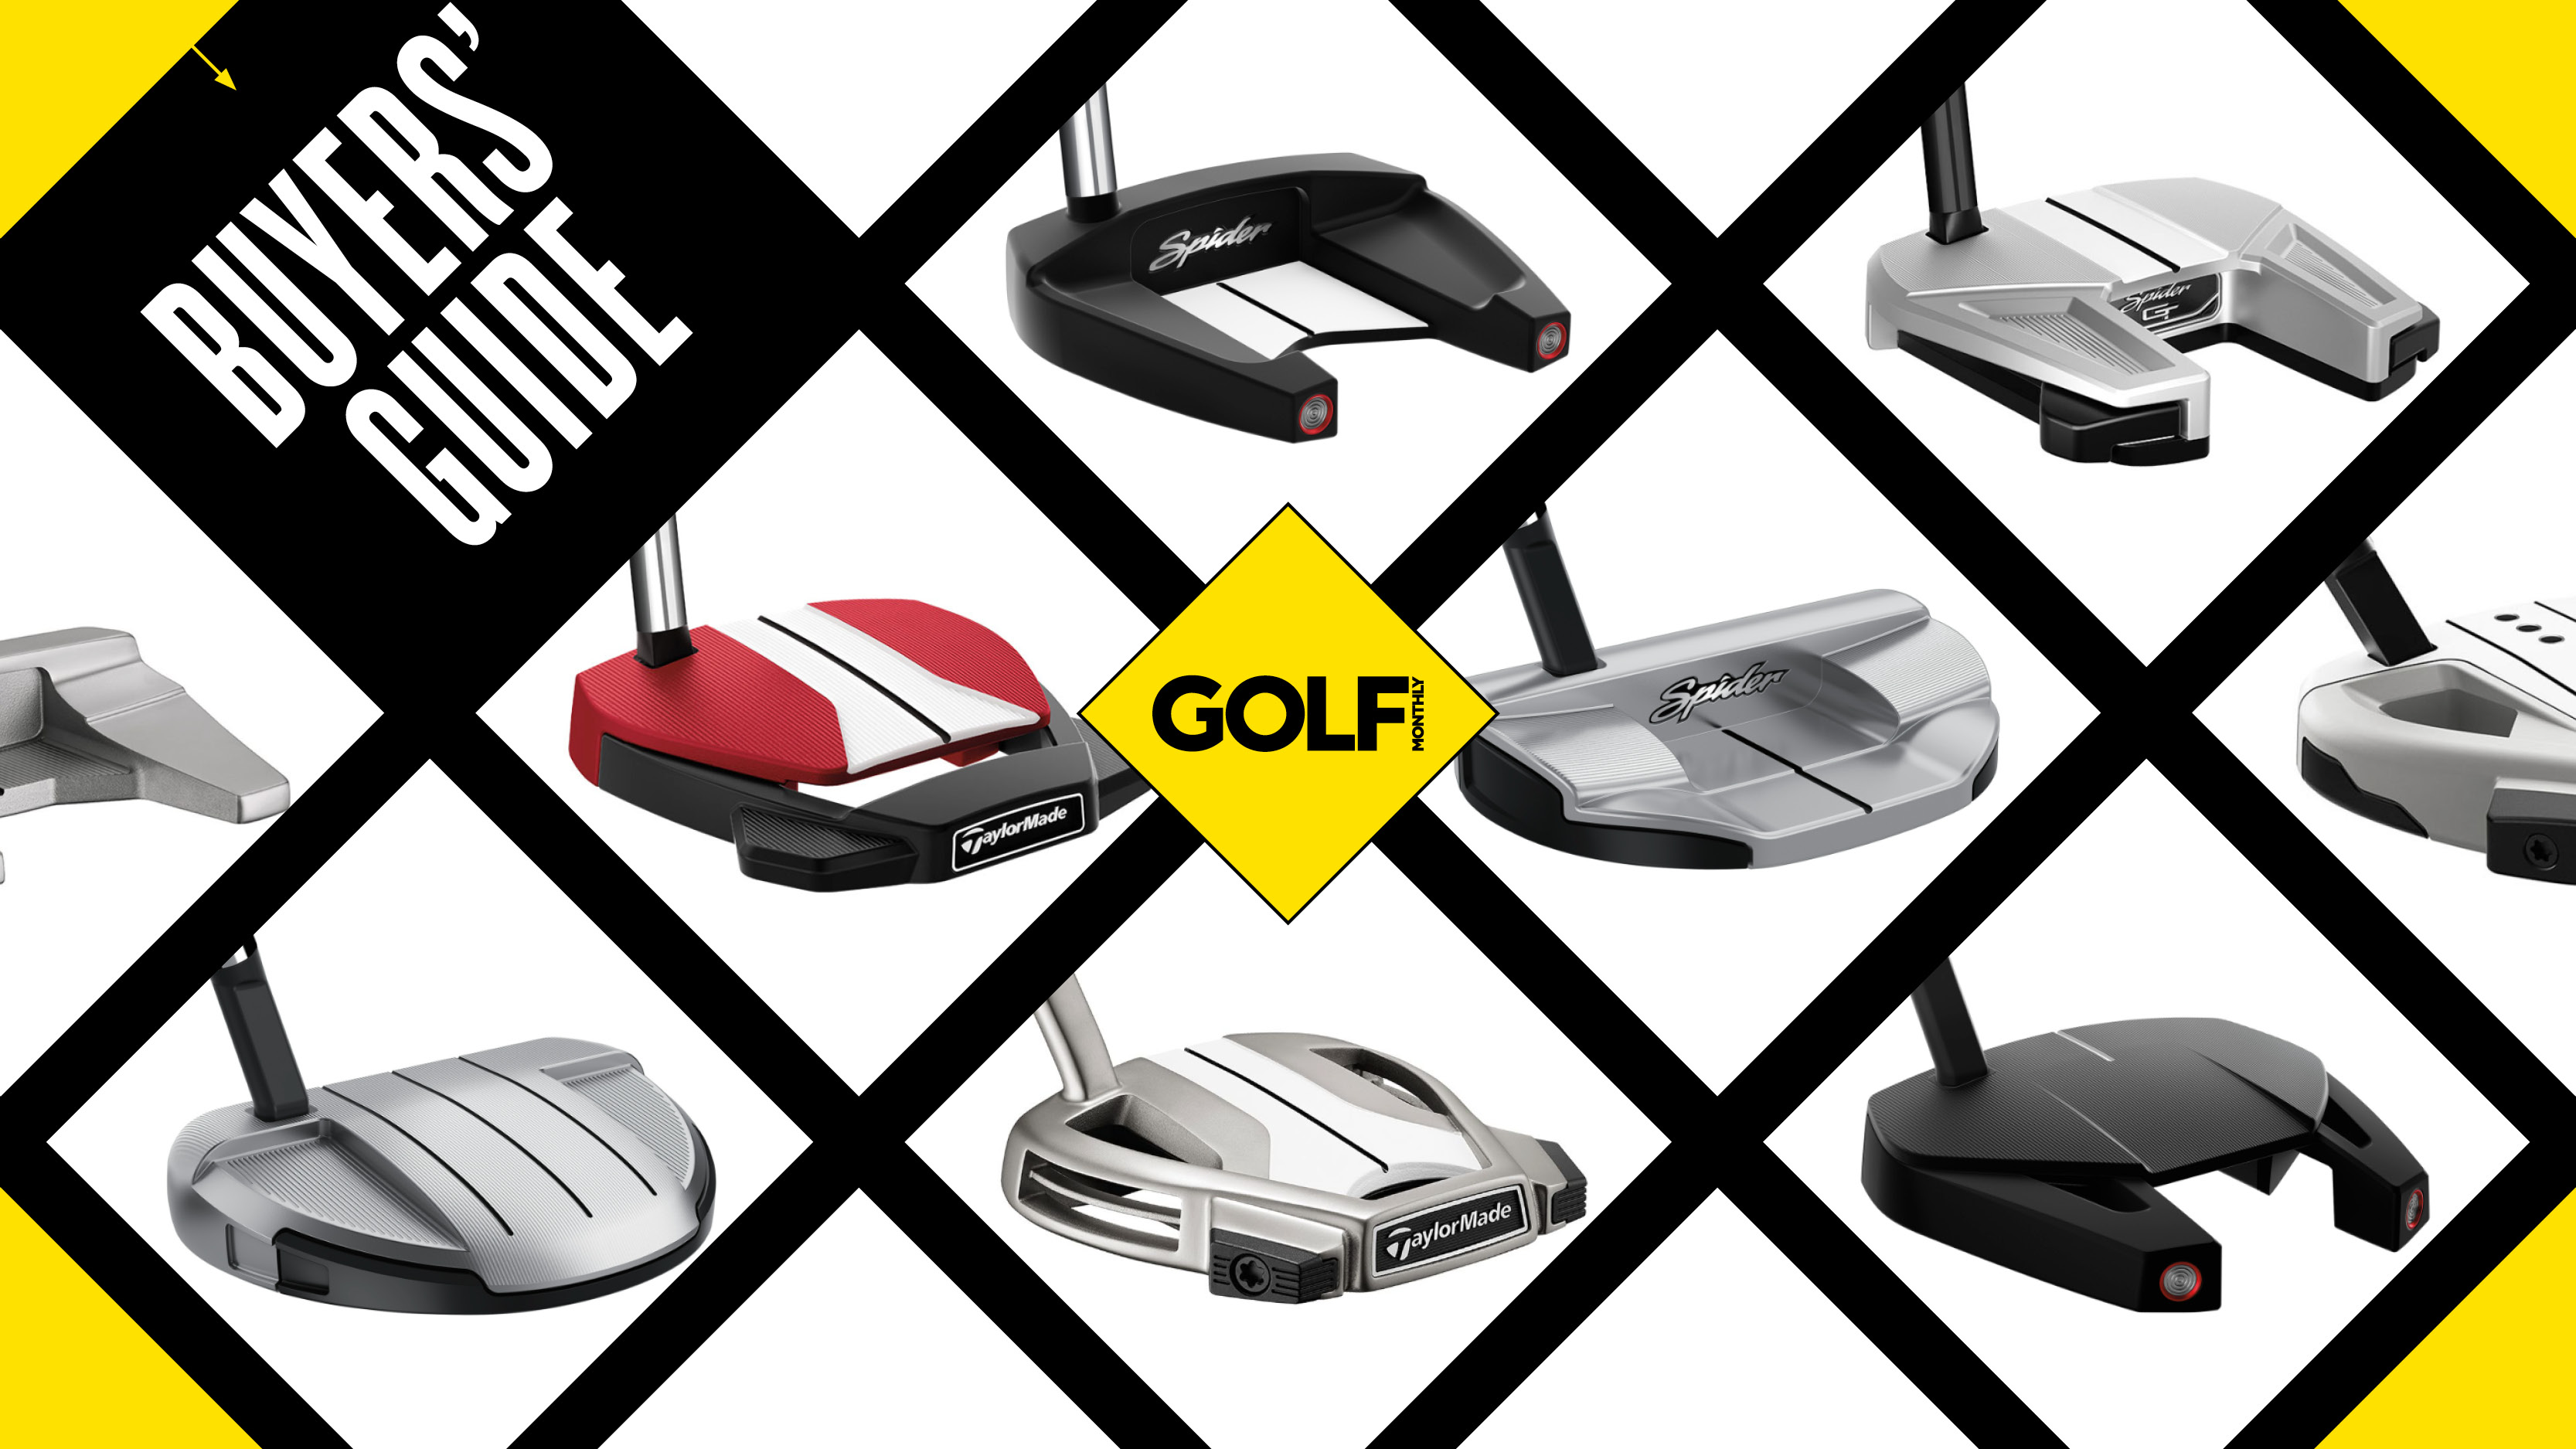 TaylorMade Spider S Putter Review - Golf Monthly